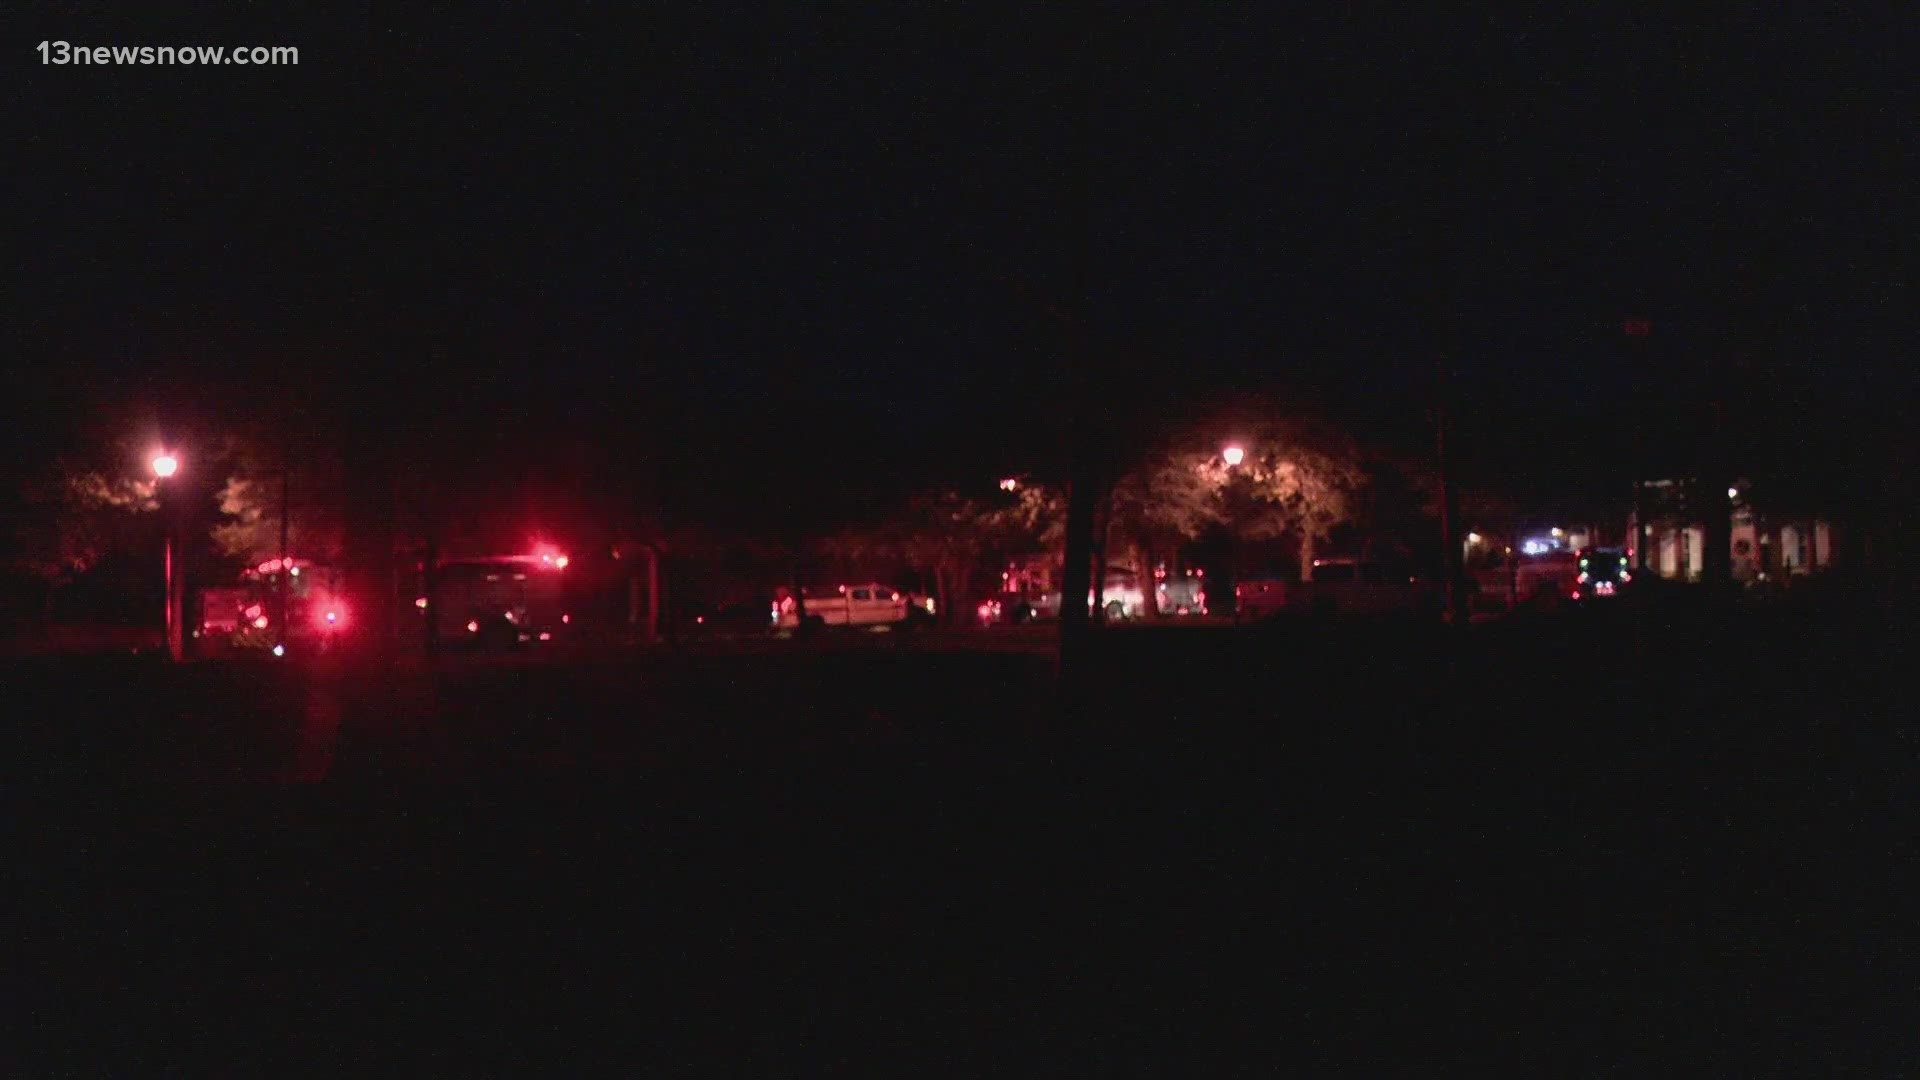 The fire department said it happened at Signature Golf Course near the Villages at West Neck apartments.